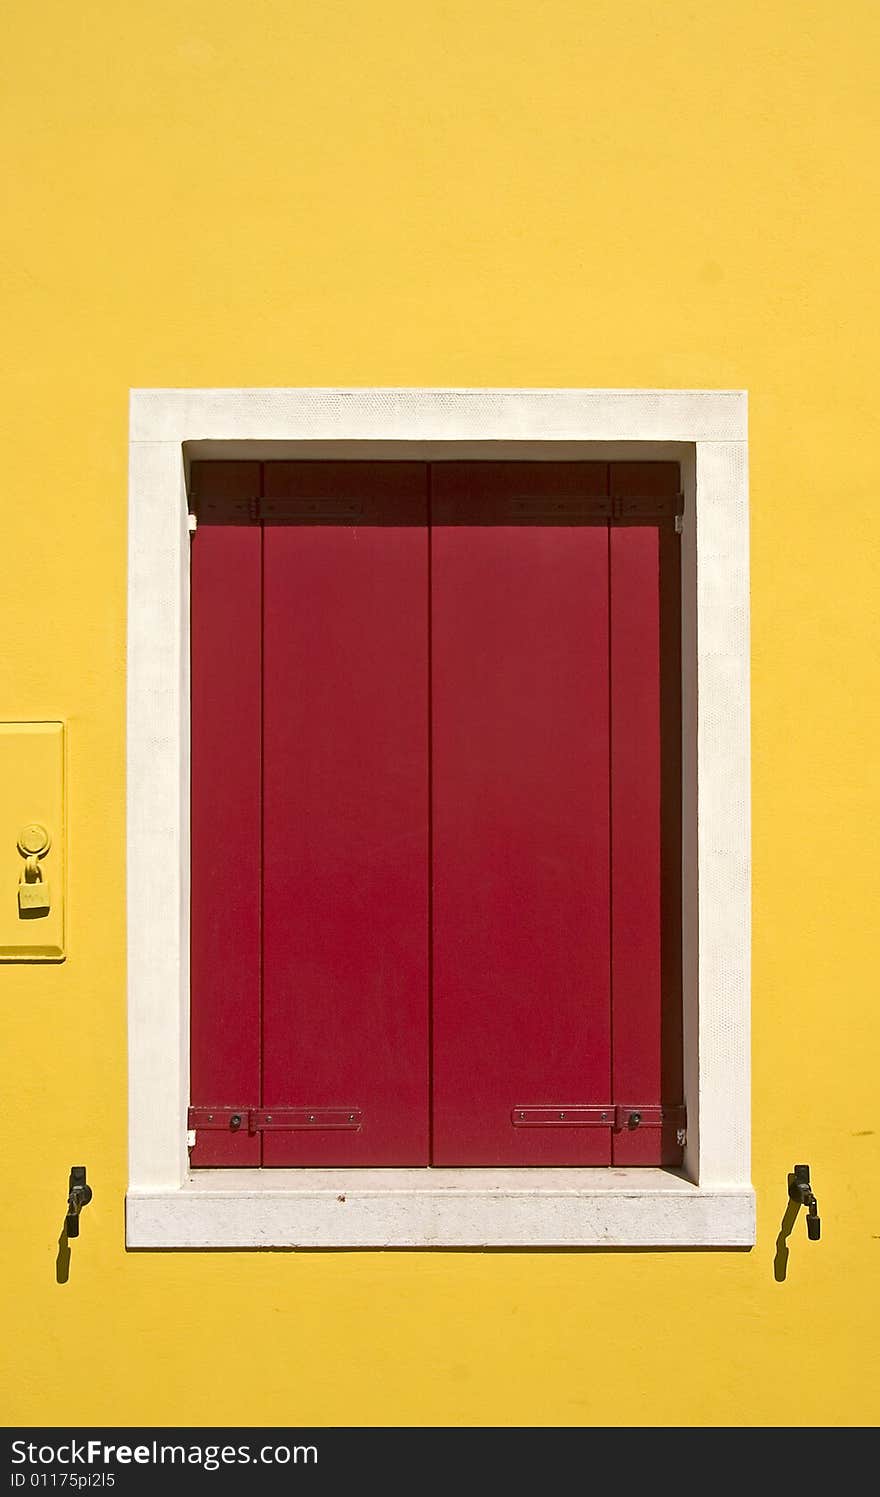 Yellow wall with a red window-shutters. Yellow wall with a red window-shutters